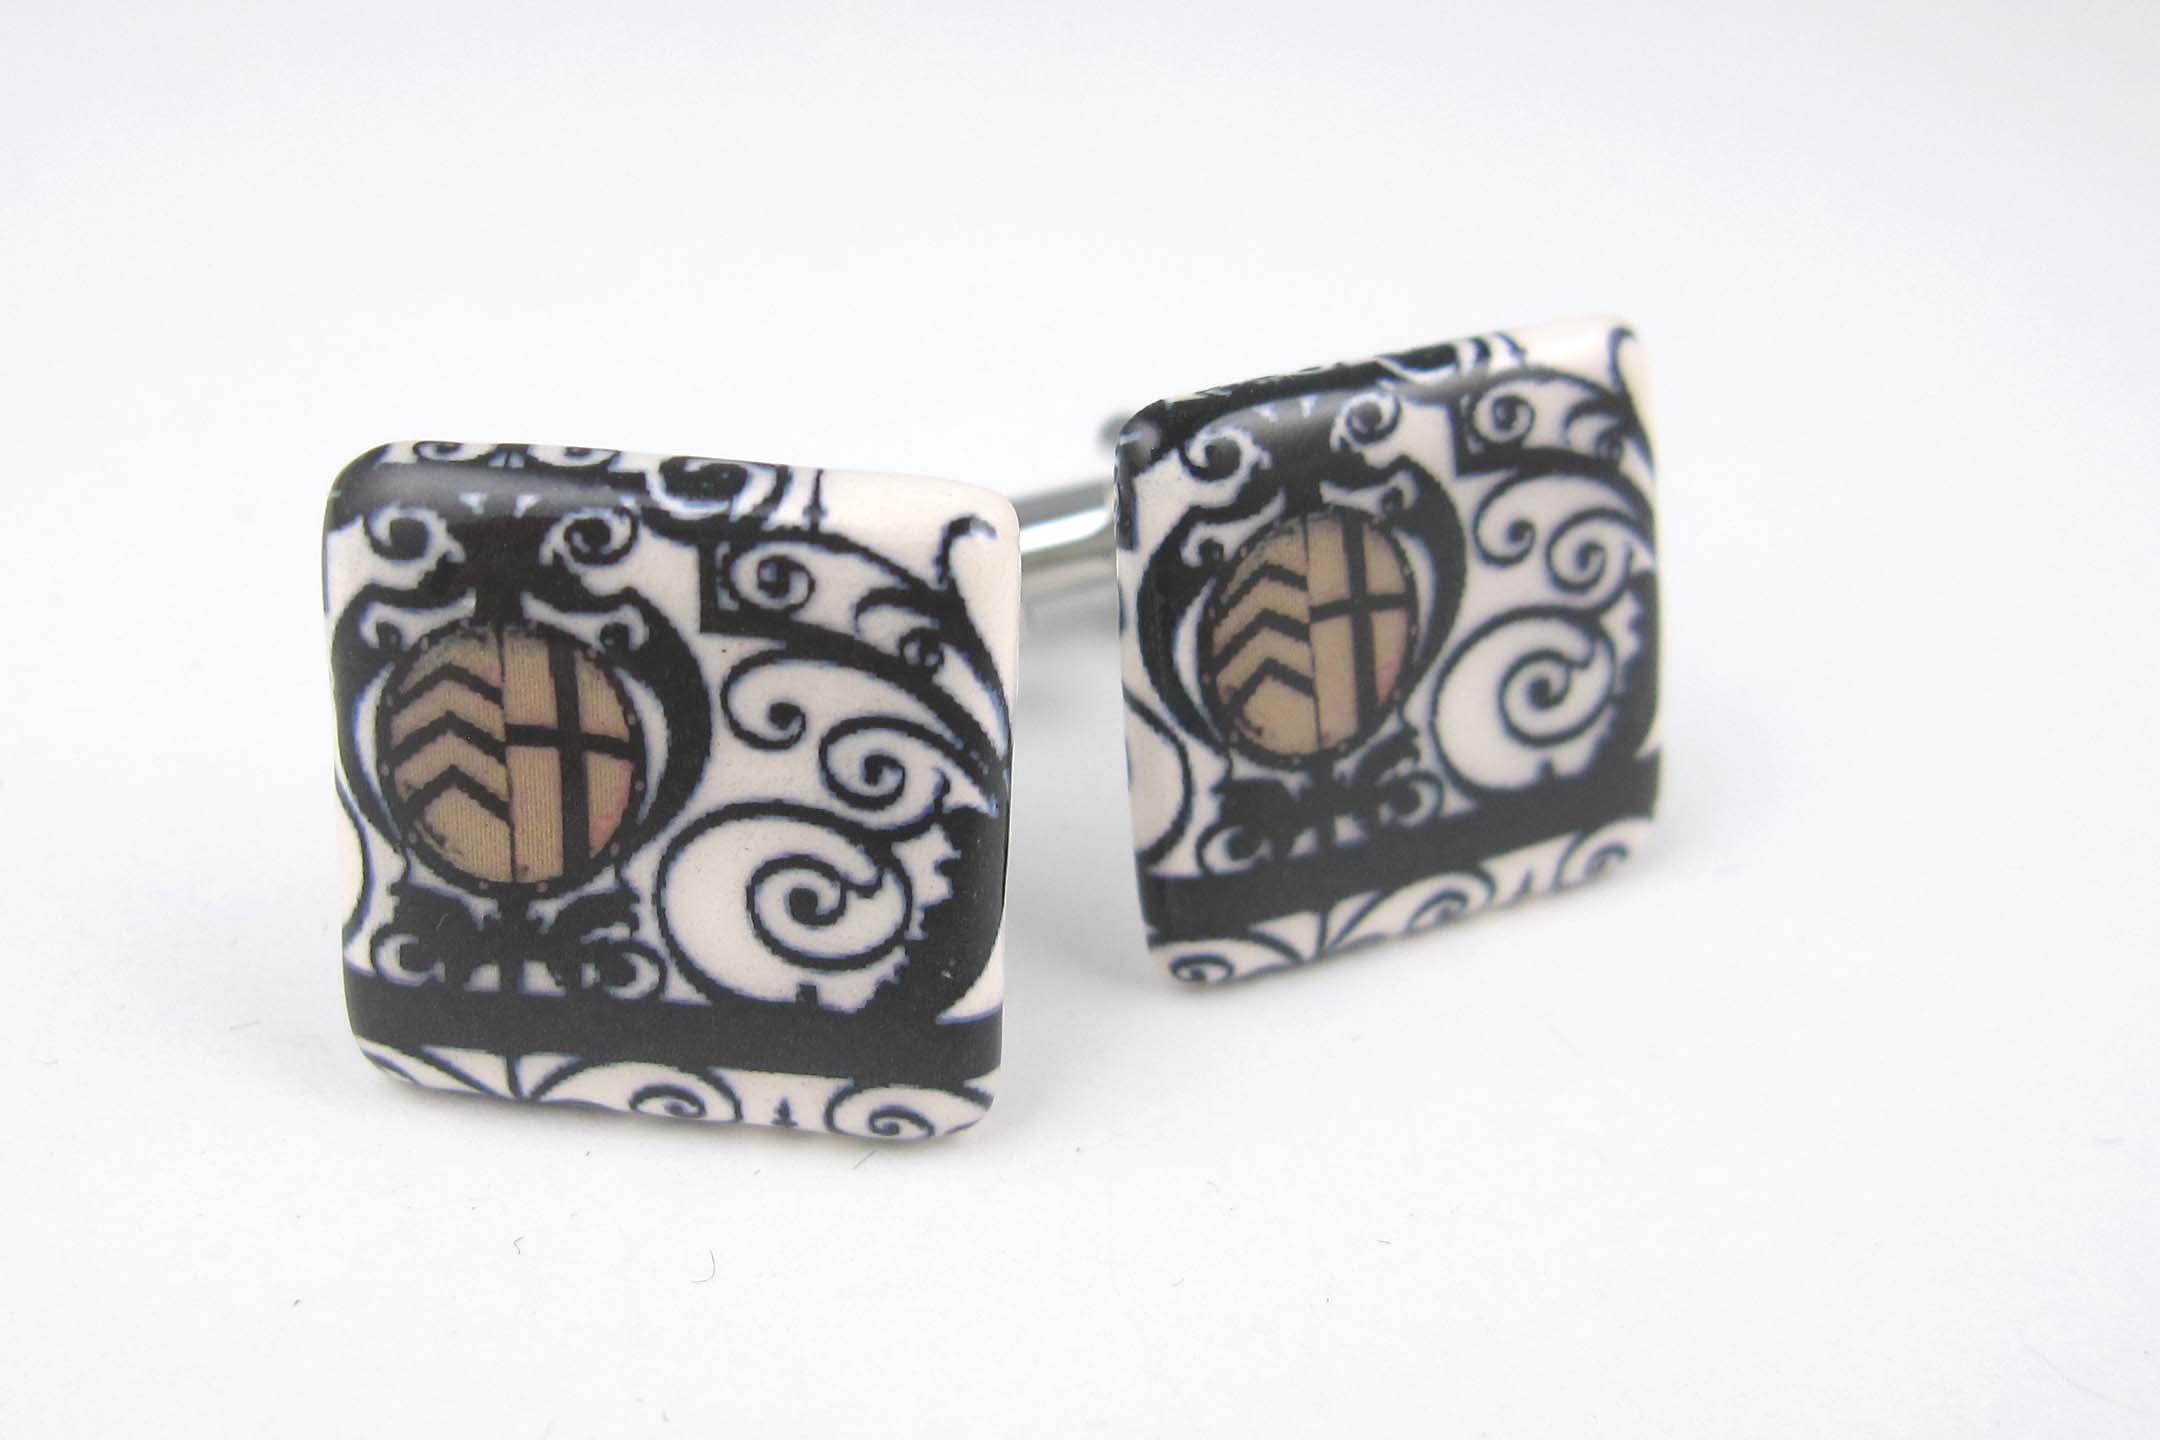 View Entrance to Clare College cufflinks